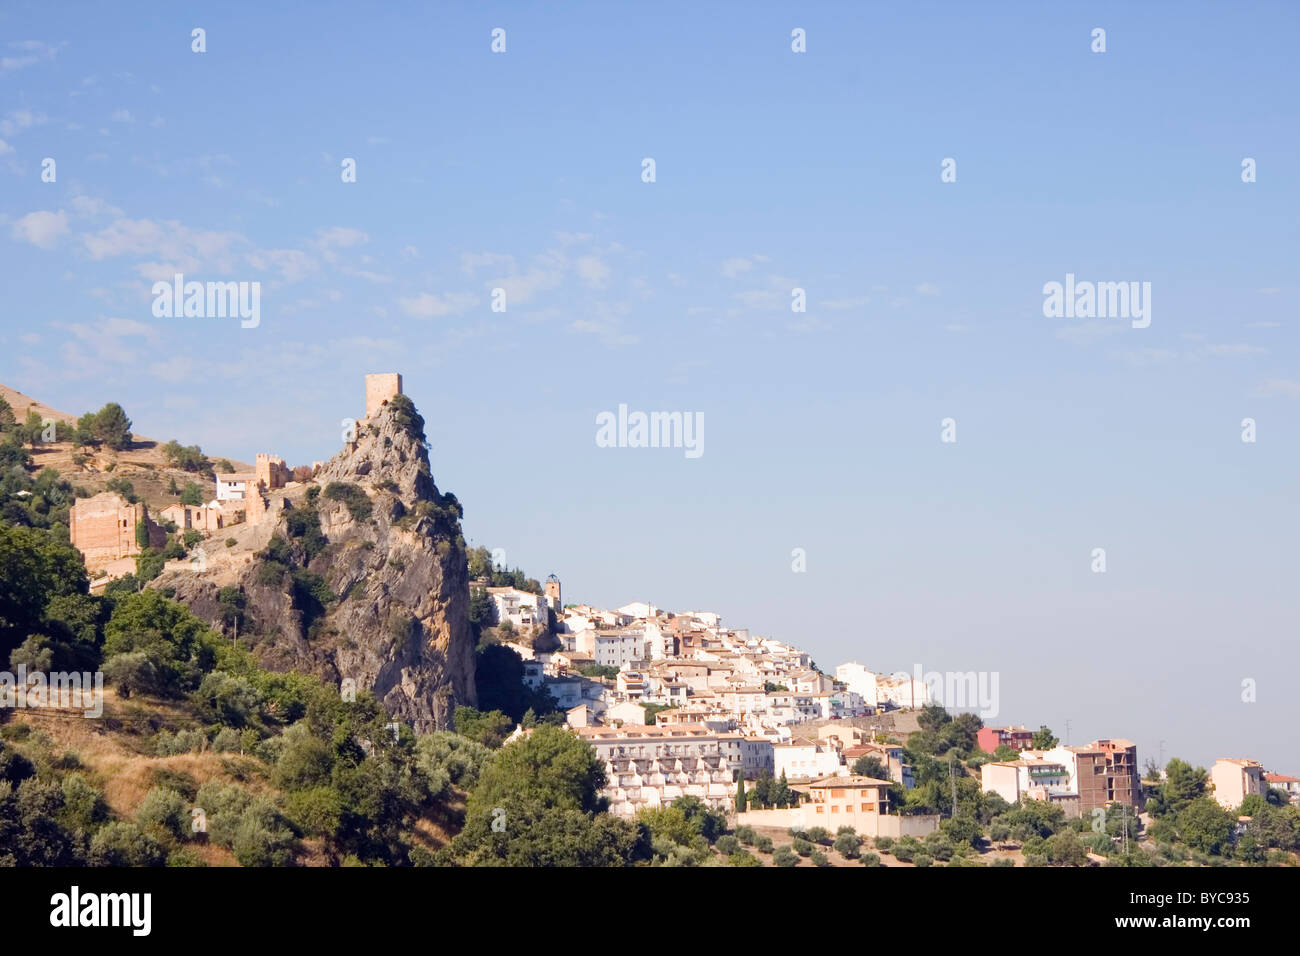 Cazorla, Jaen Province, Andalucia, Spain. Yedra Castle and town. Stock Photo